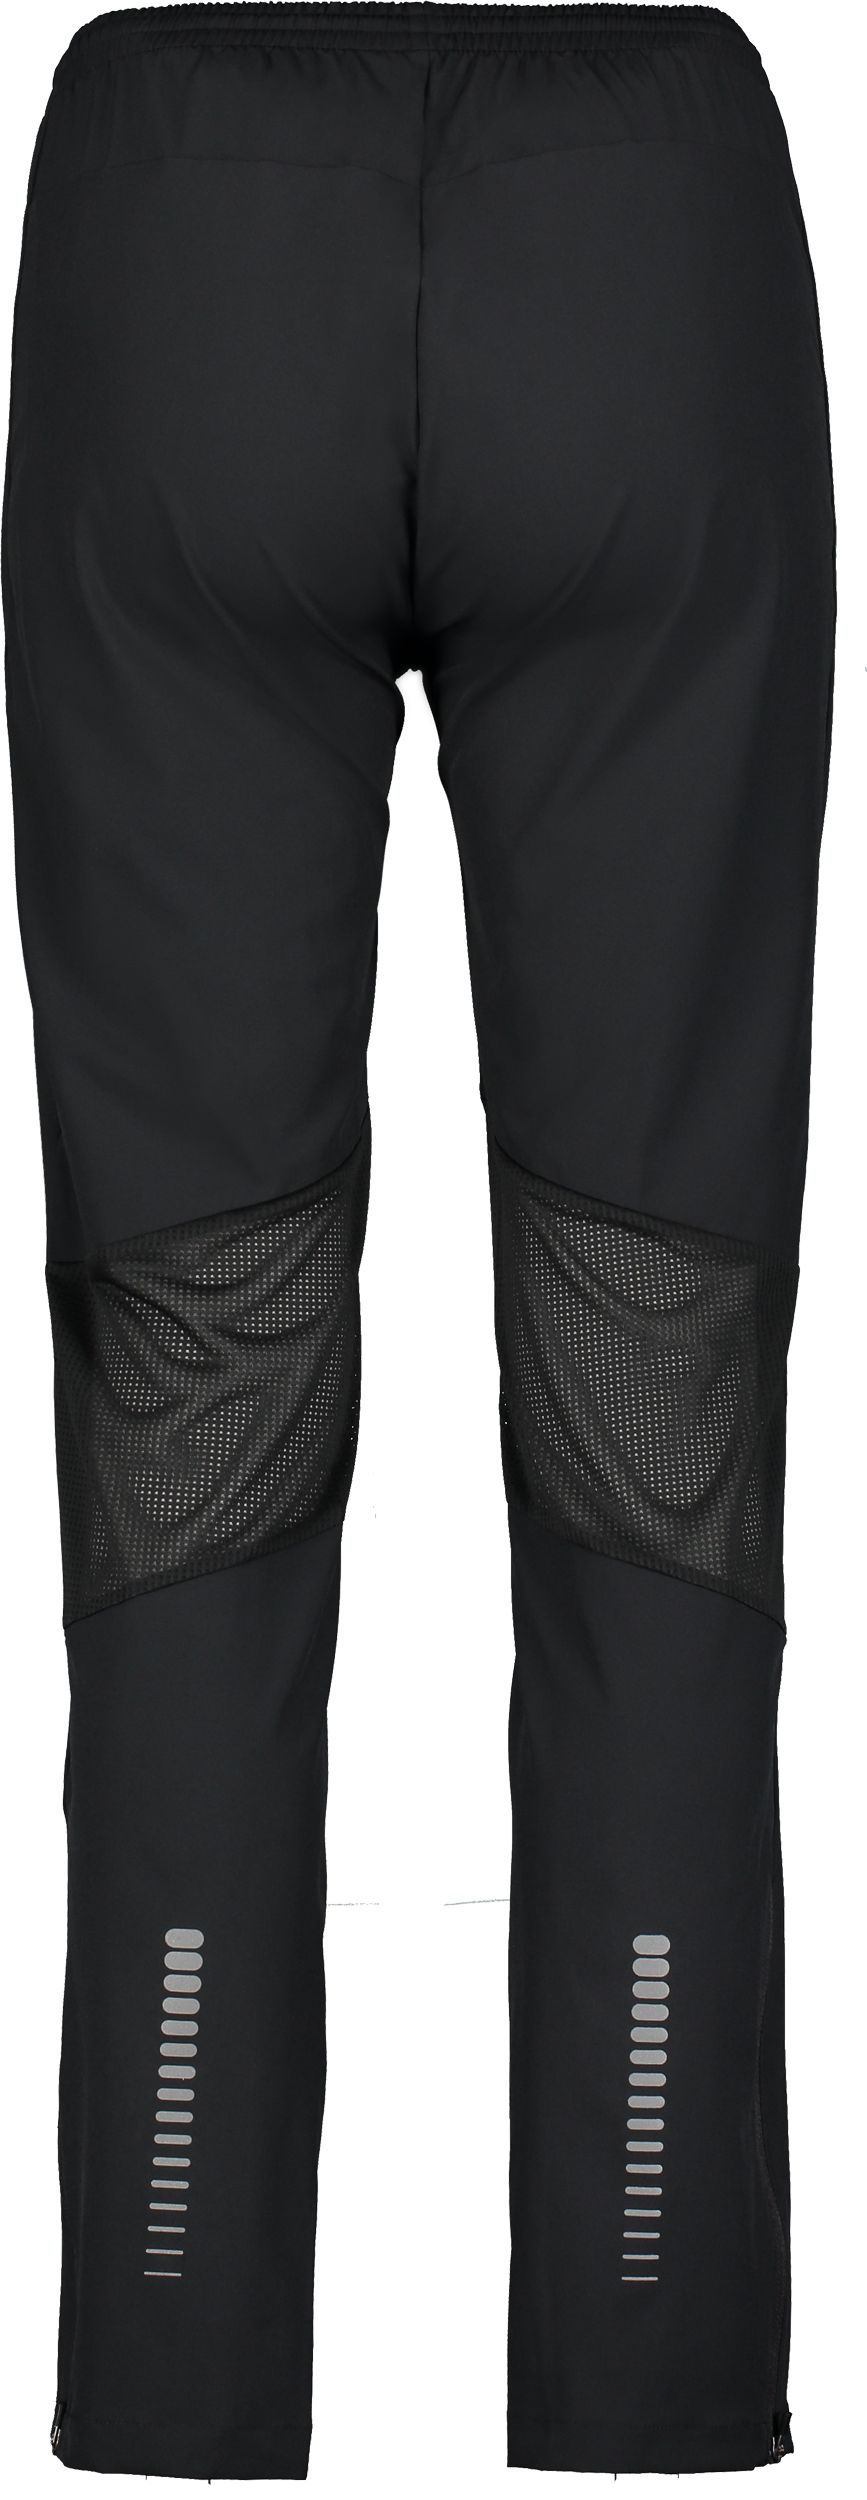 RONHILL, WIND PANT W